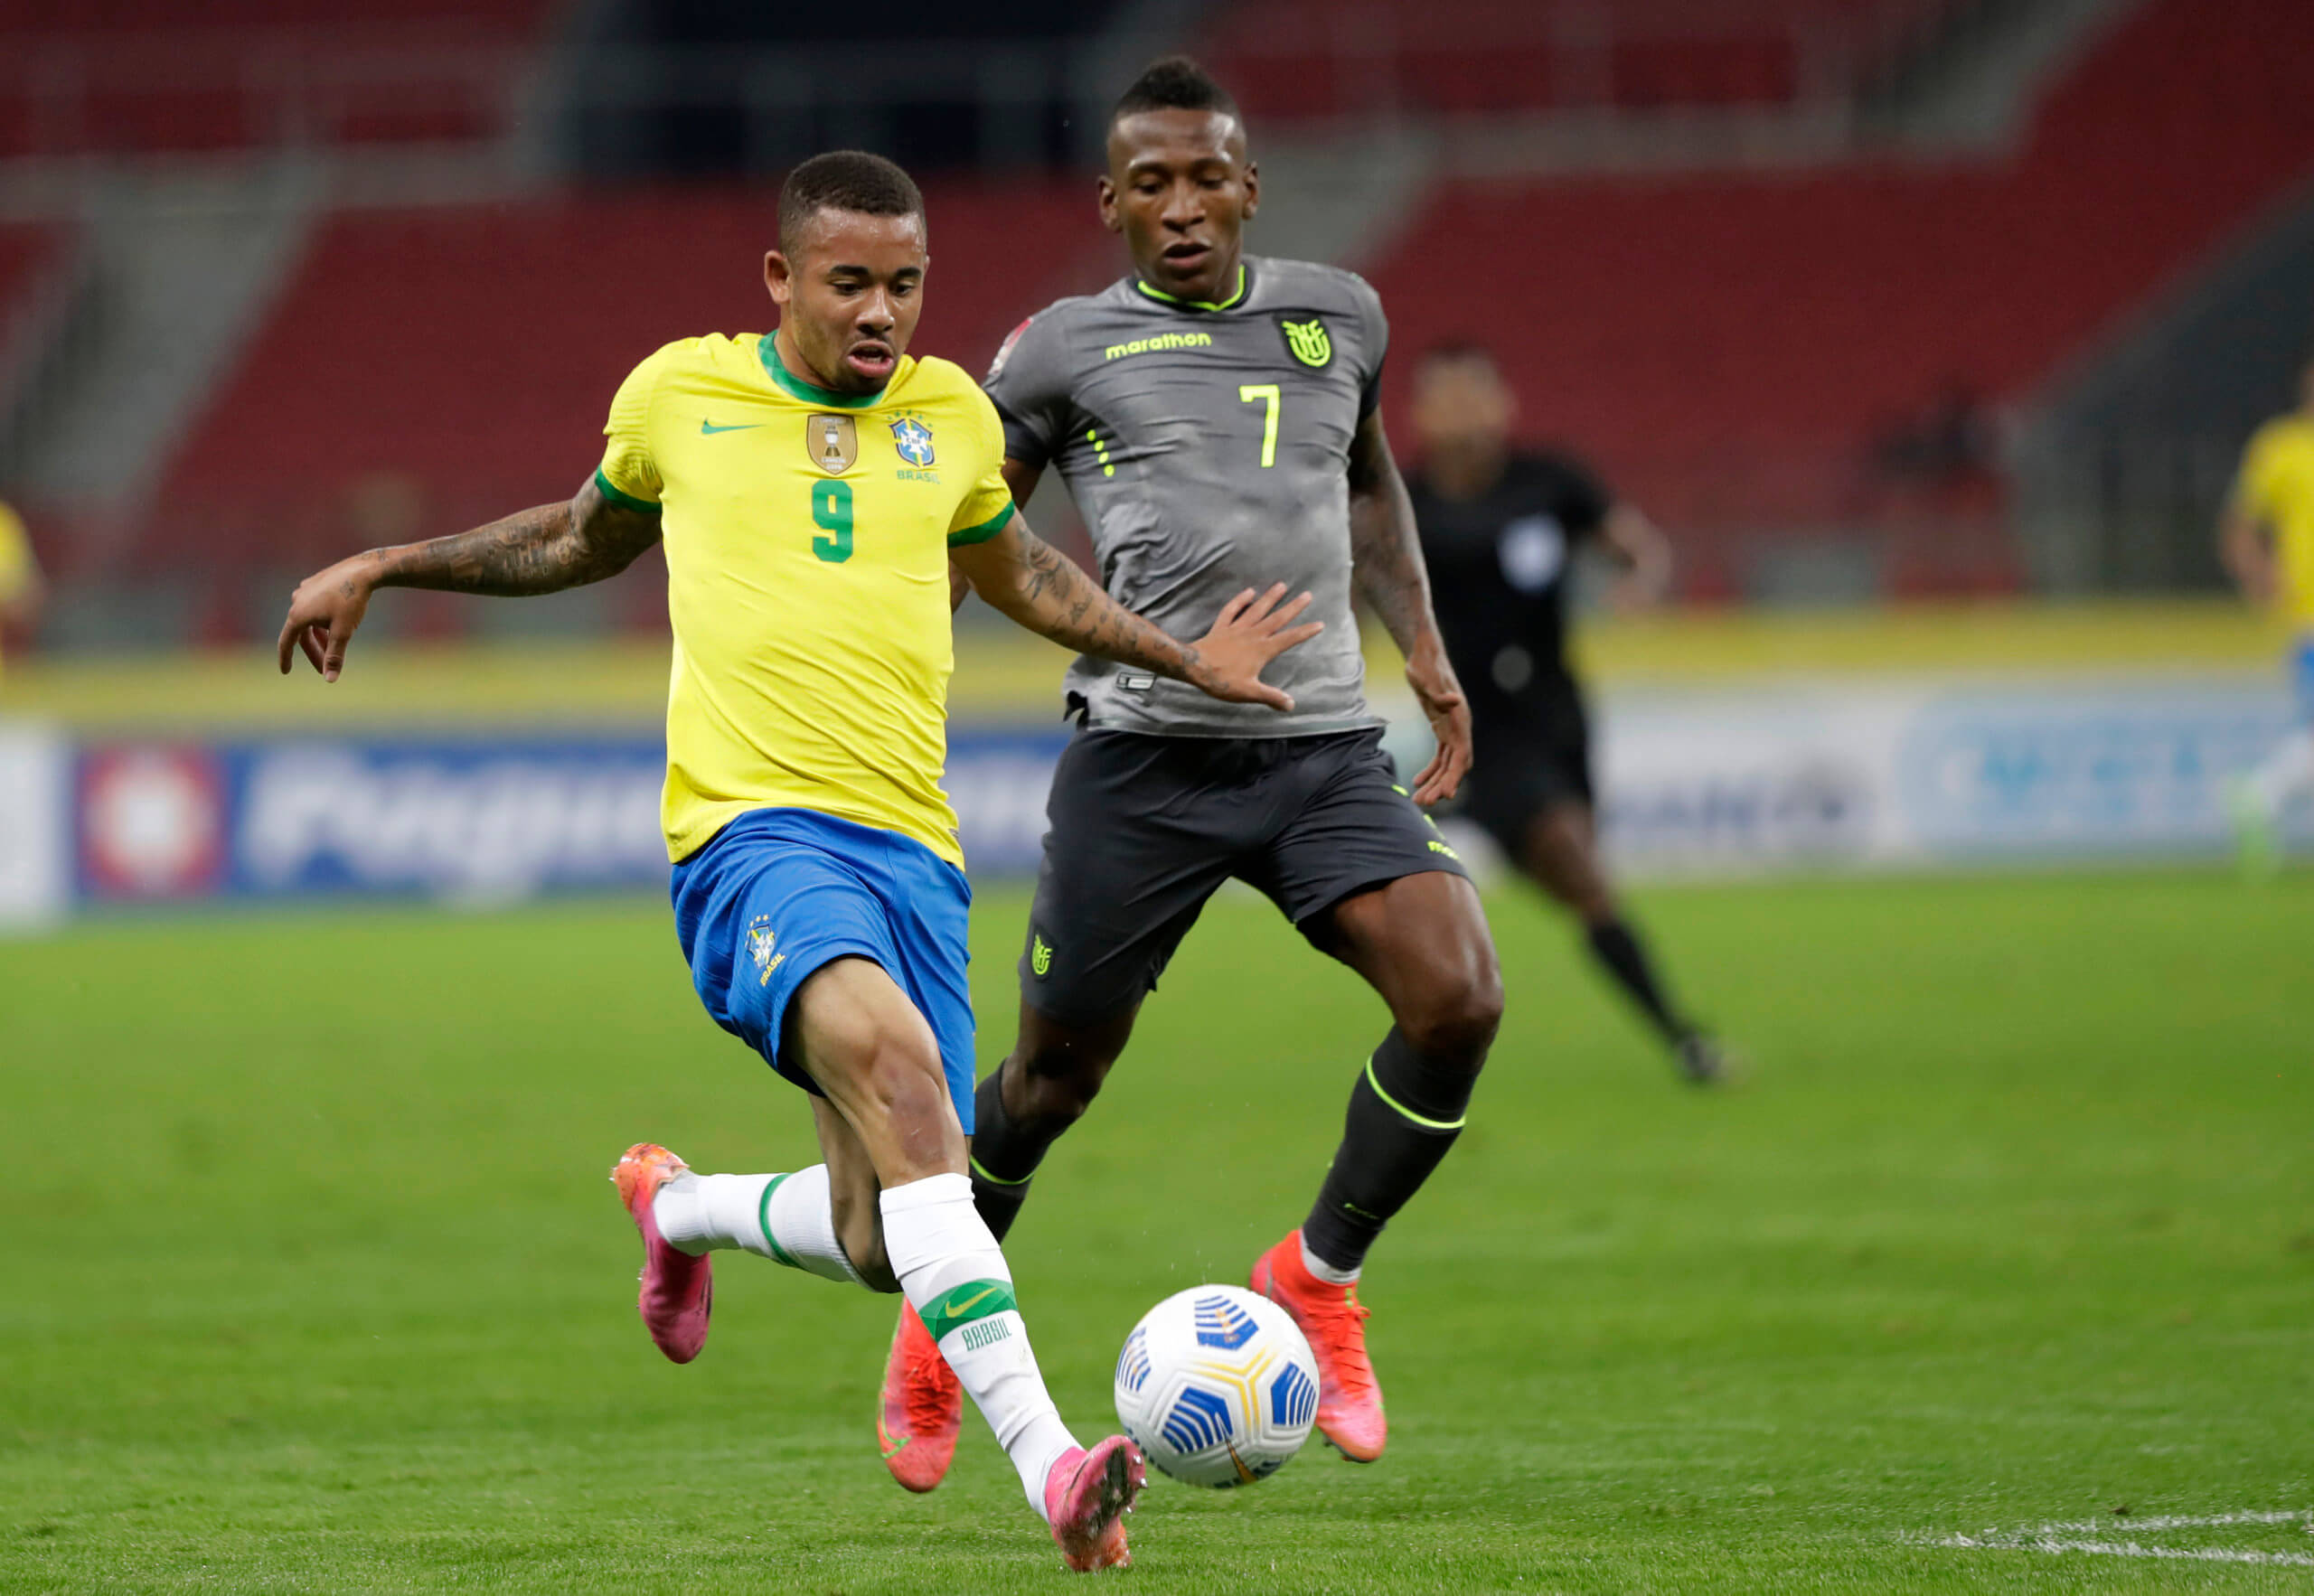 World Cup preview: Brazil the team to beat in Group G